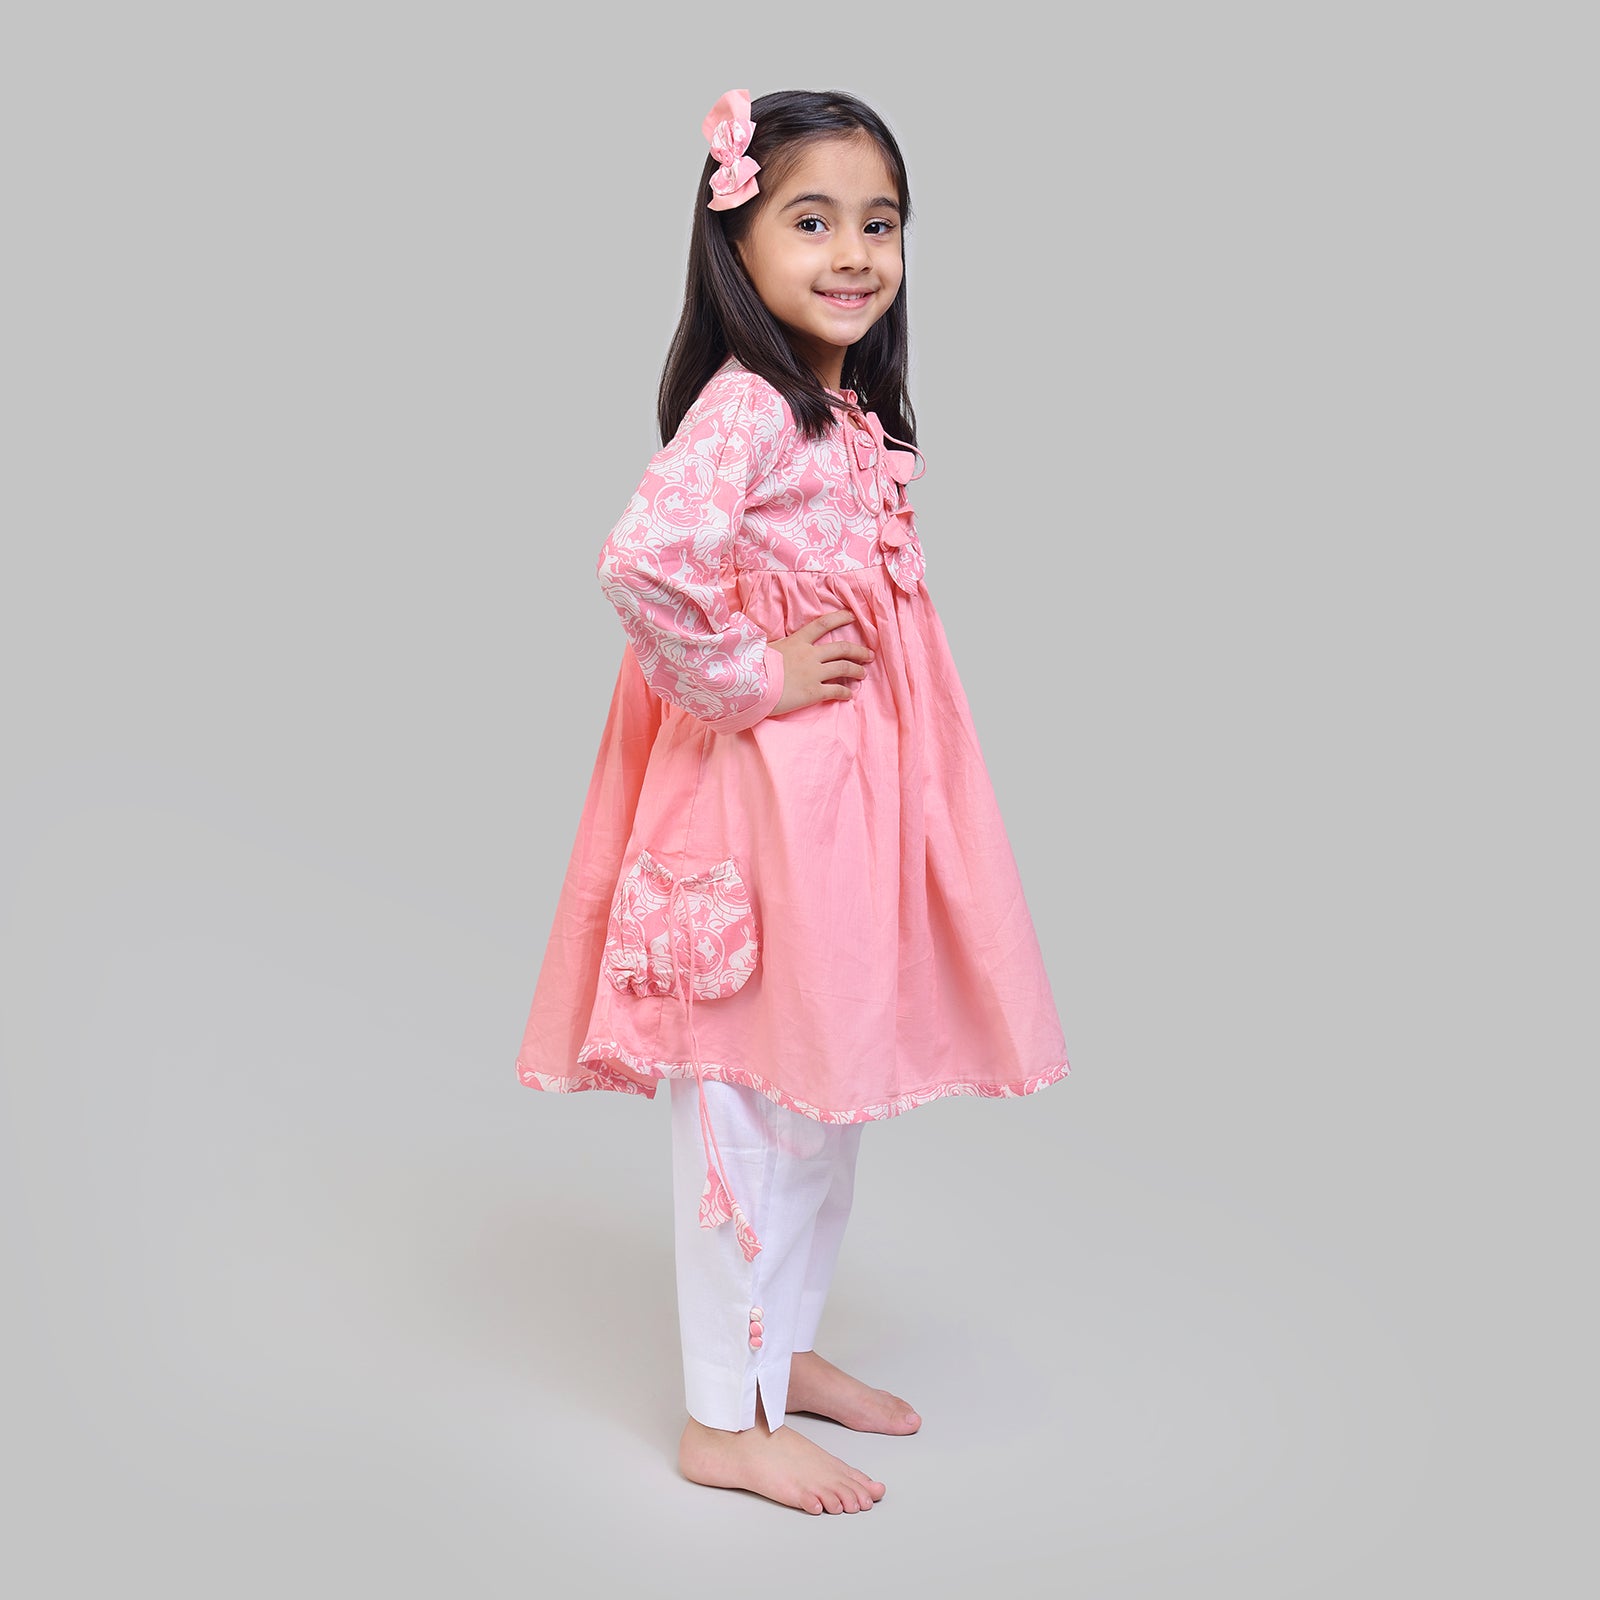 Cotton Full Sleeve Round Neck Kurta with Side Pockets And White Pants For Girls with The Foolish Lion & The Clever Rabbit Print